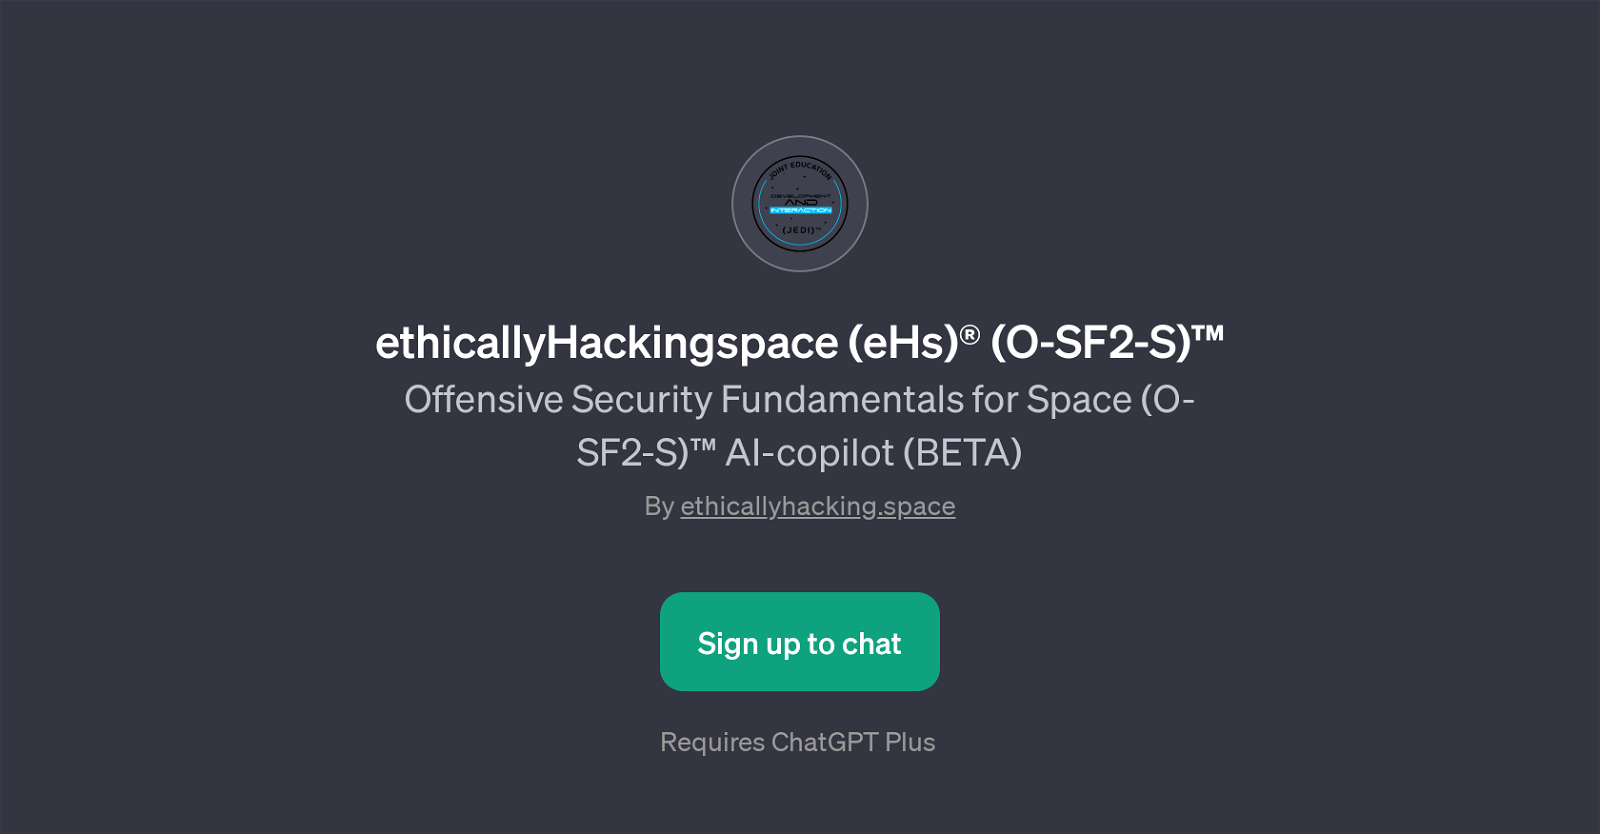 ethicallyHackingspace (eHs)  (O-SF2-S) website